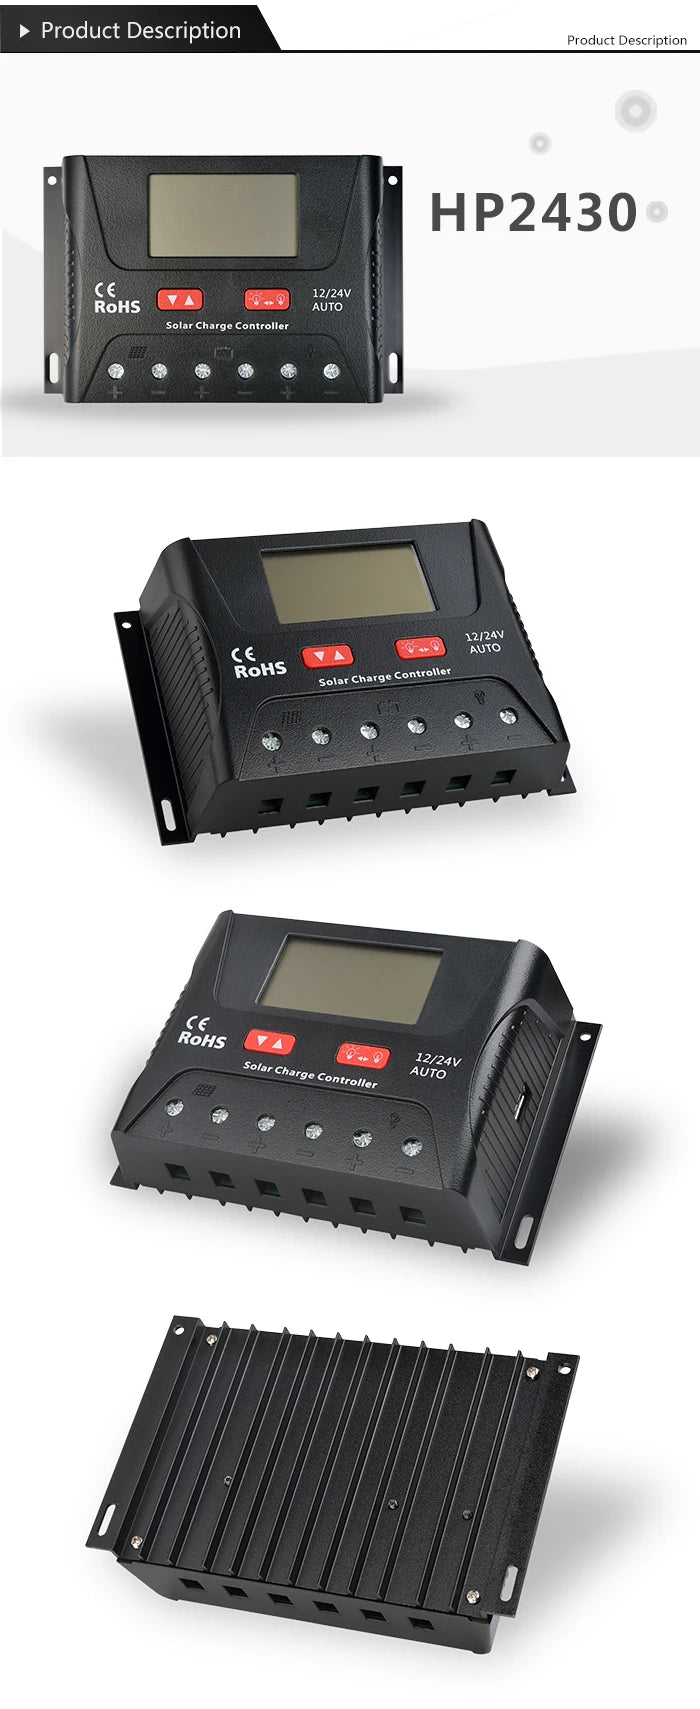 Auto solar charge controller regulates power from solar panels to charge various battery types.